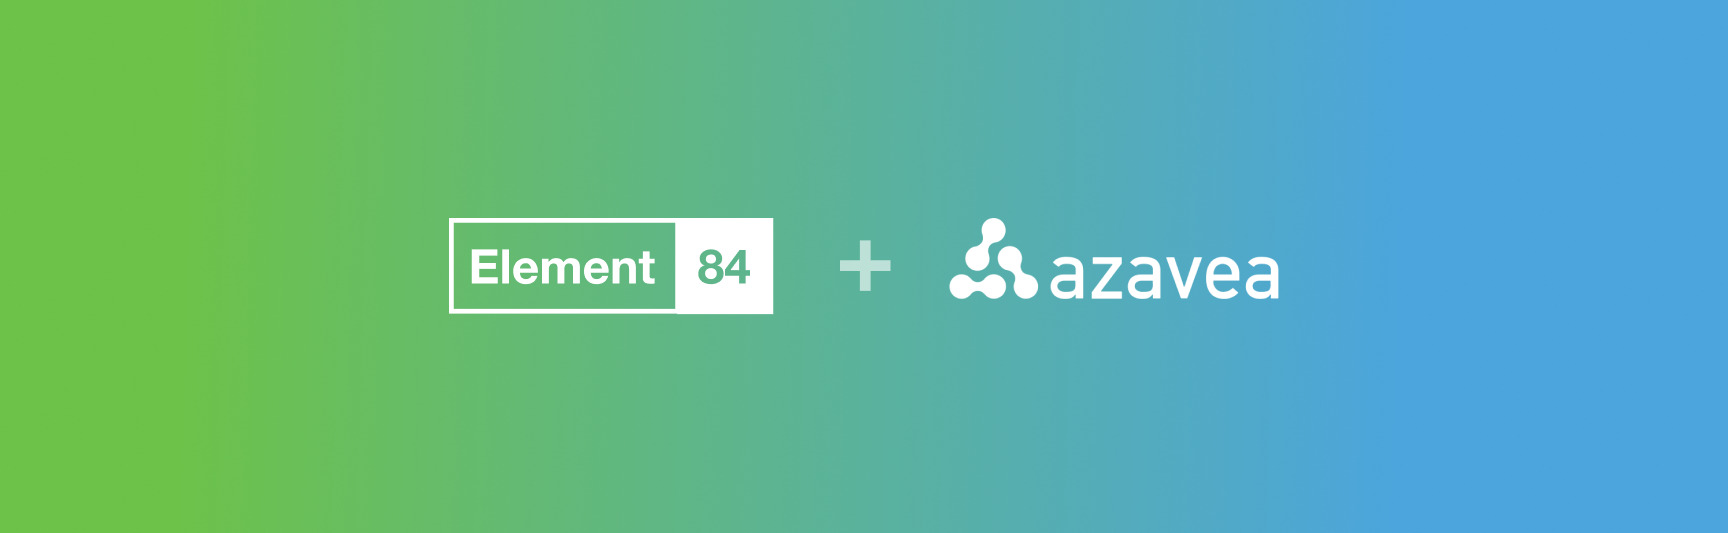 Element 84 and Azavea's logos are joined with a plus sign on a gradient background of blue and green (the two organizations' brand colors)